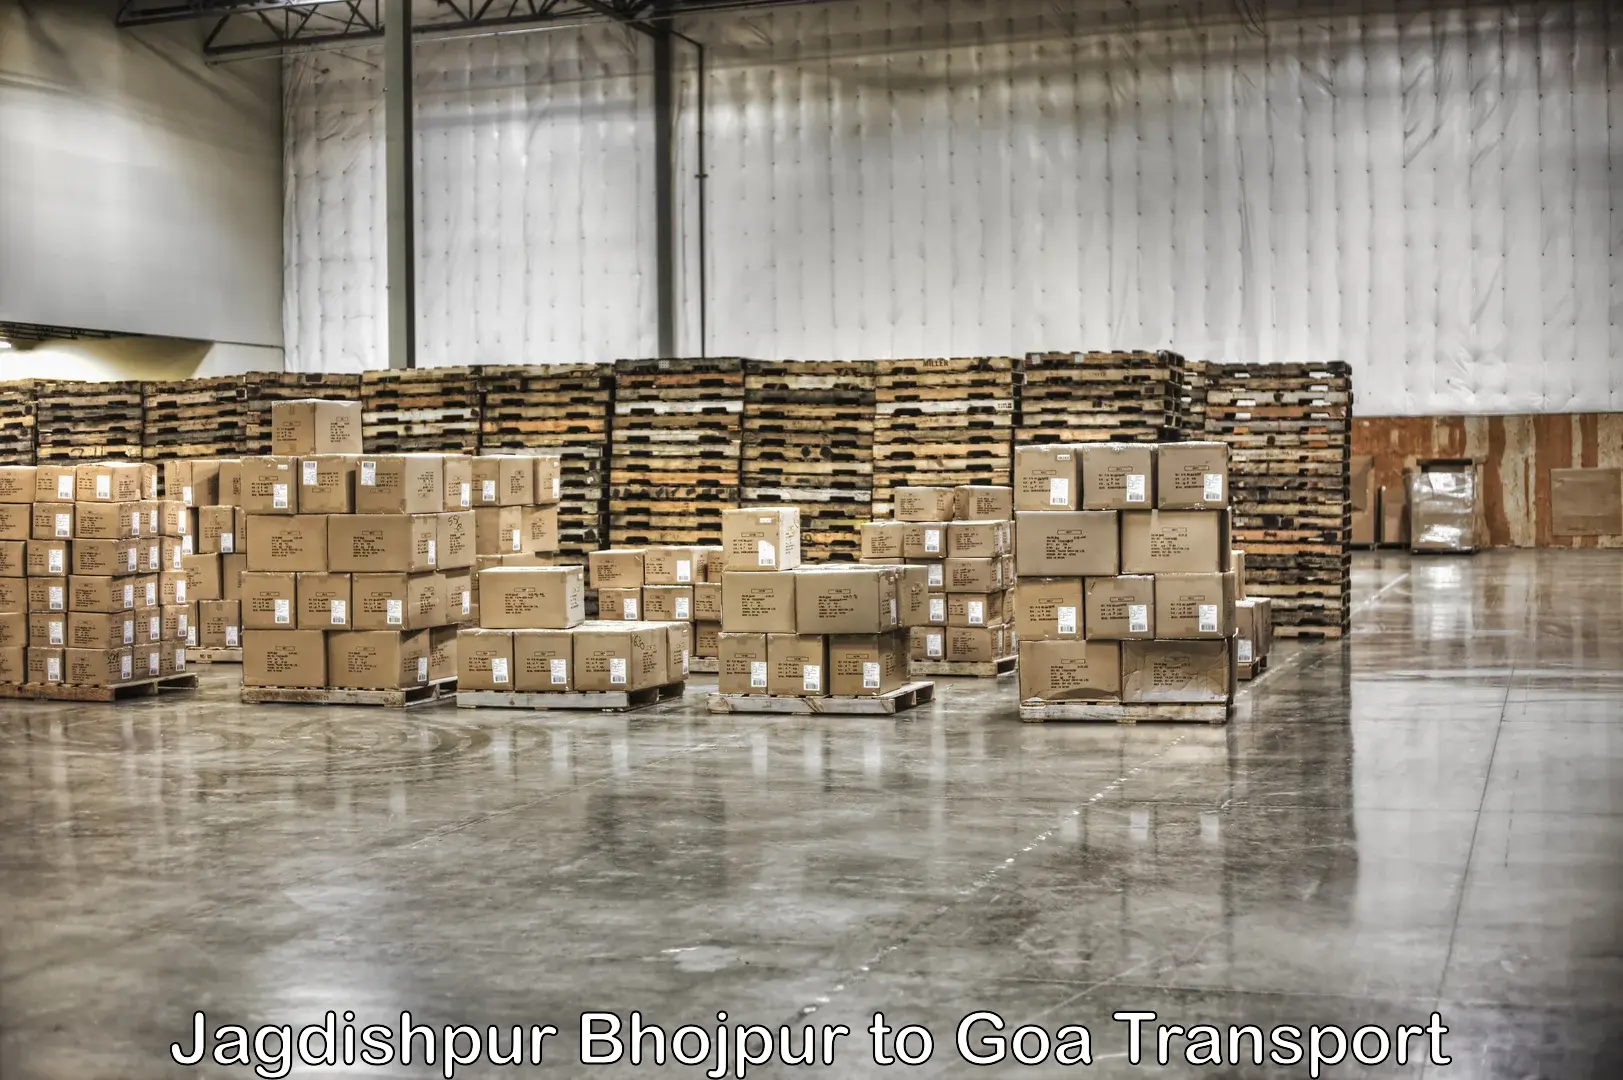 Express transport services in Jagdishpur Bhojpur to Goa